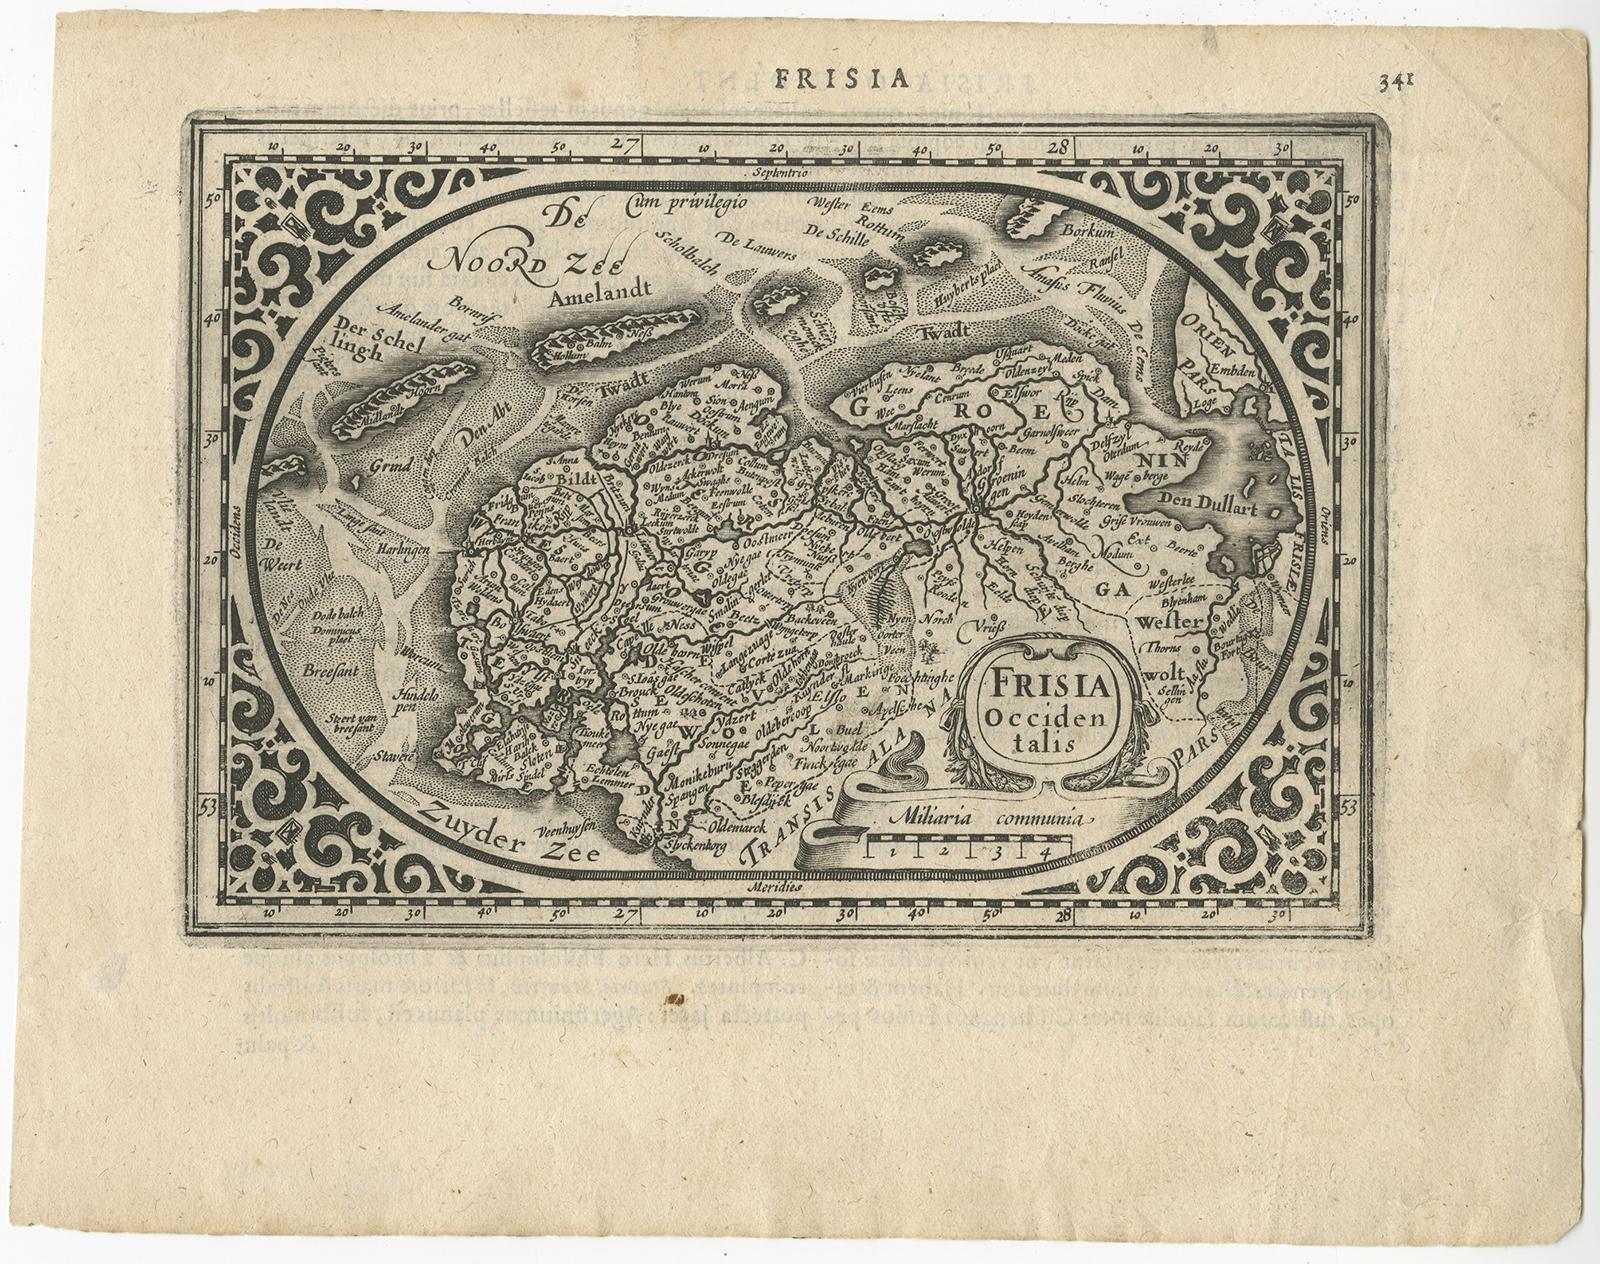 Antique map Friesland titled 'Frisia Occidentalis'. Small, decorative map of the province of Friesland, the Netherlands. Second state, out of three, originating from 'Atlas Minor' by J. Janssonius. 

Artist: Engraved by A. Goos.

Condition: